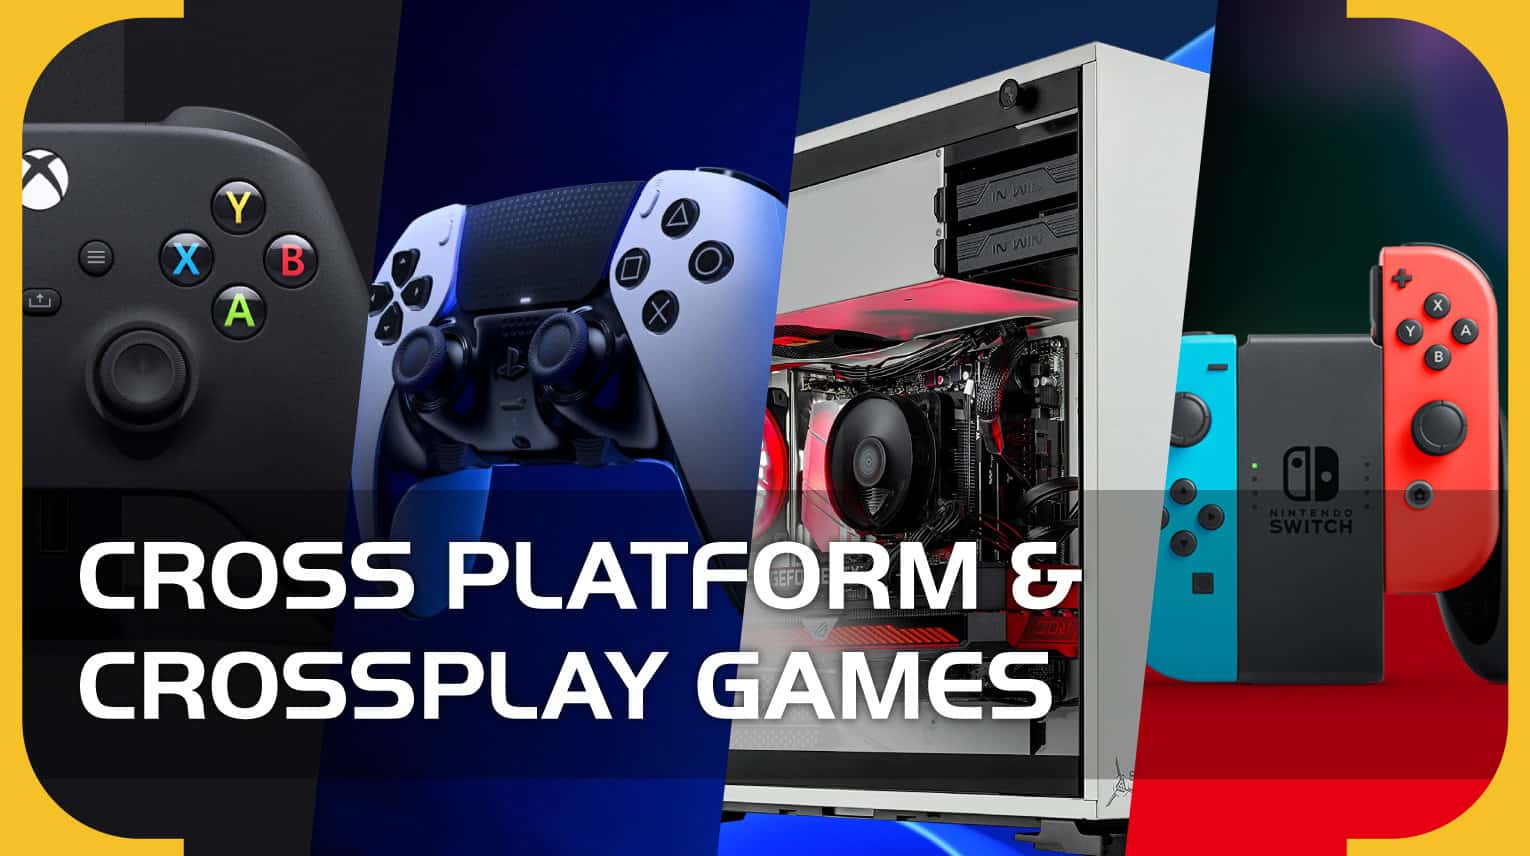 Every Cross Platform & Crossplay Game (October 2022) PS5, Xbox Series